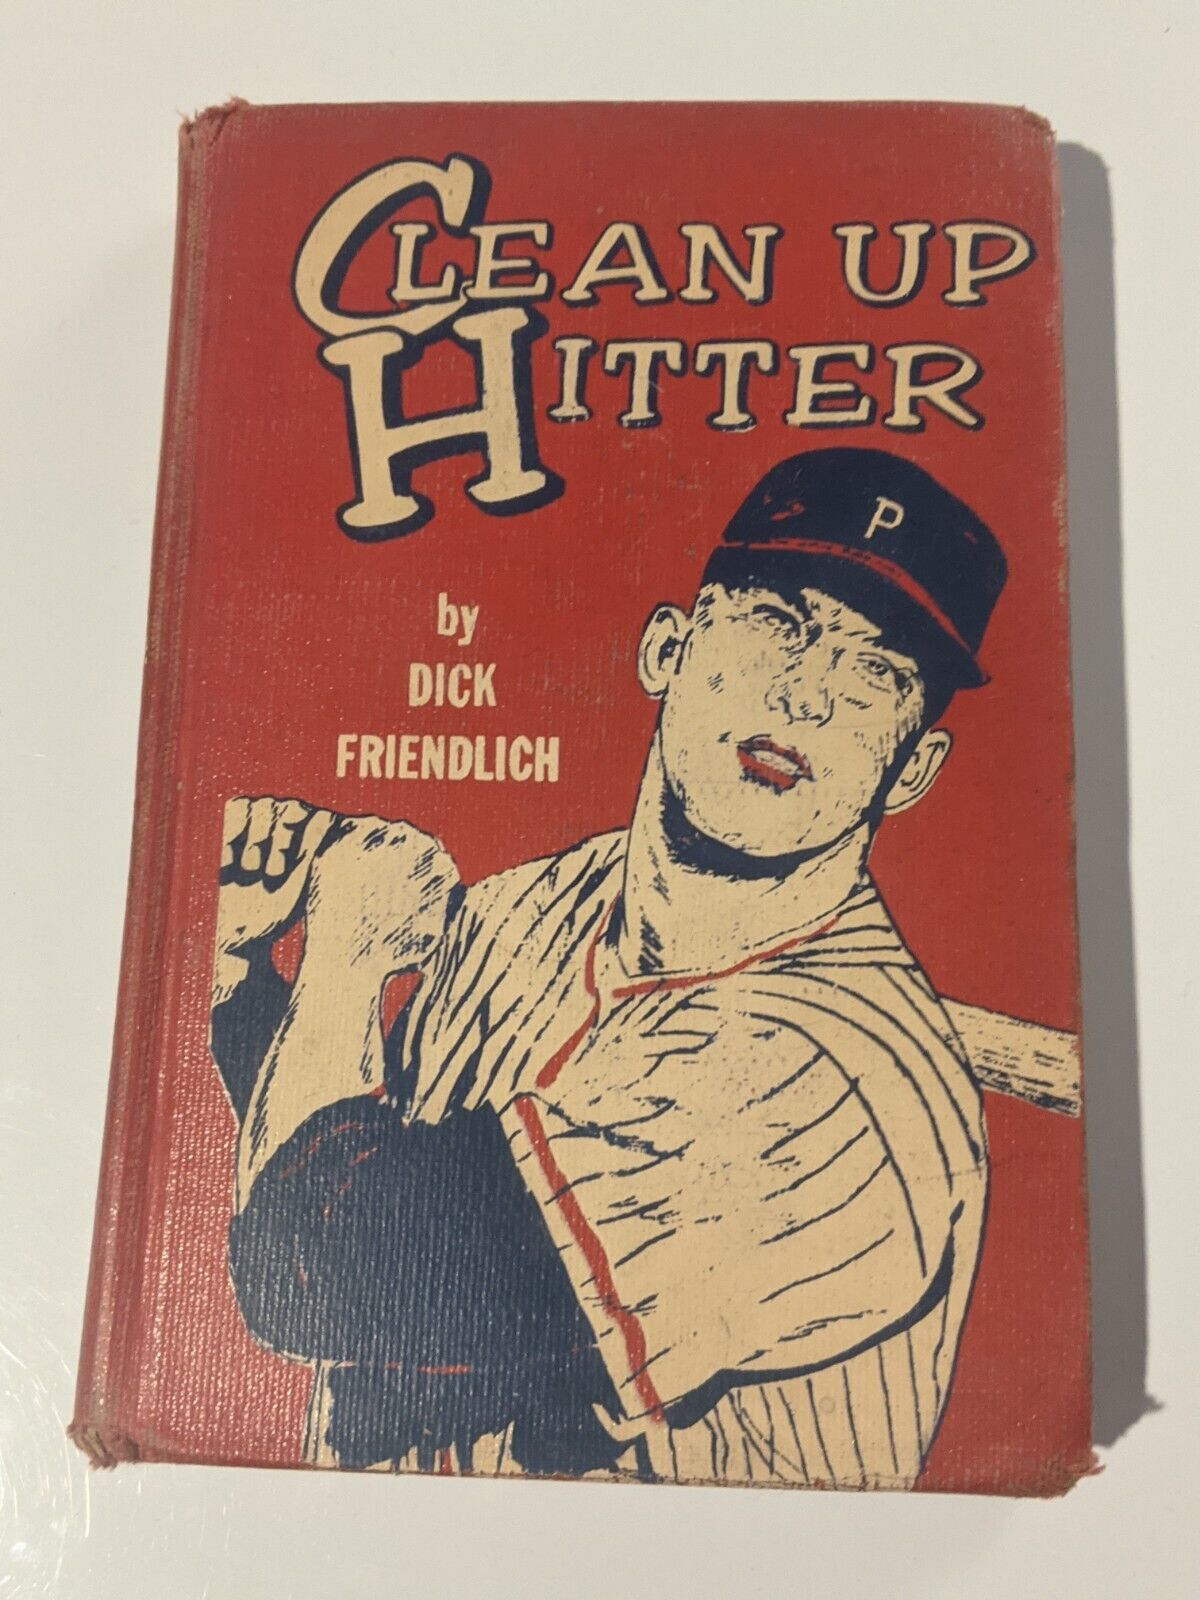 Vintage 1956 Clean Up Hitter by Dick Friendlich Hardcover